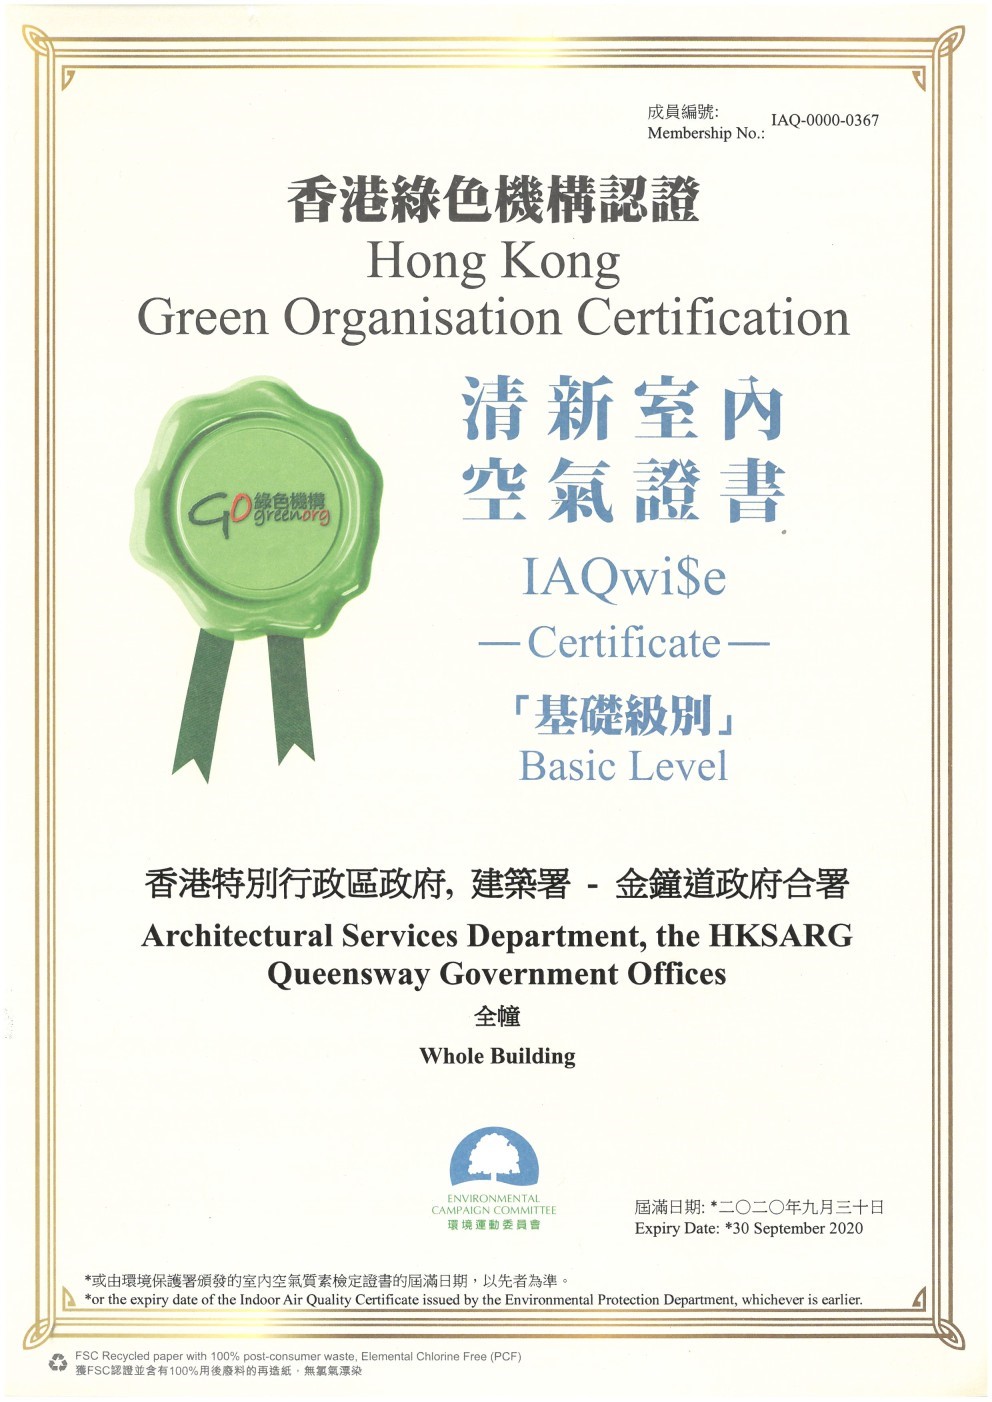 The APB Centre and QGO both received the 'Basic Level' IAQwi$e Certificates